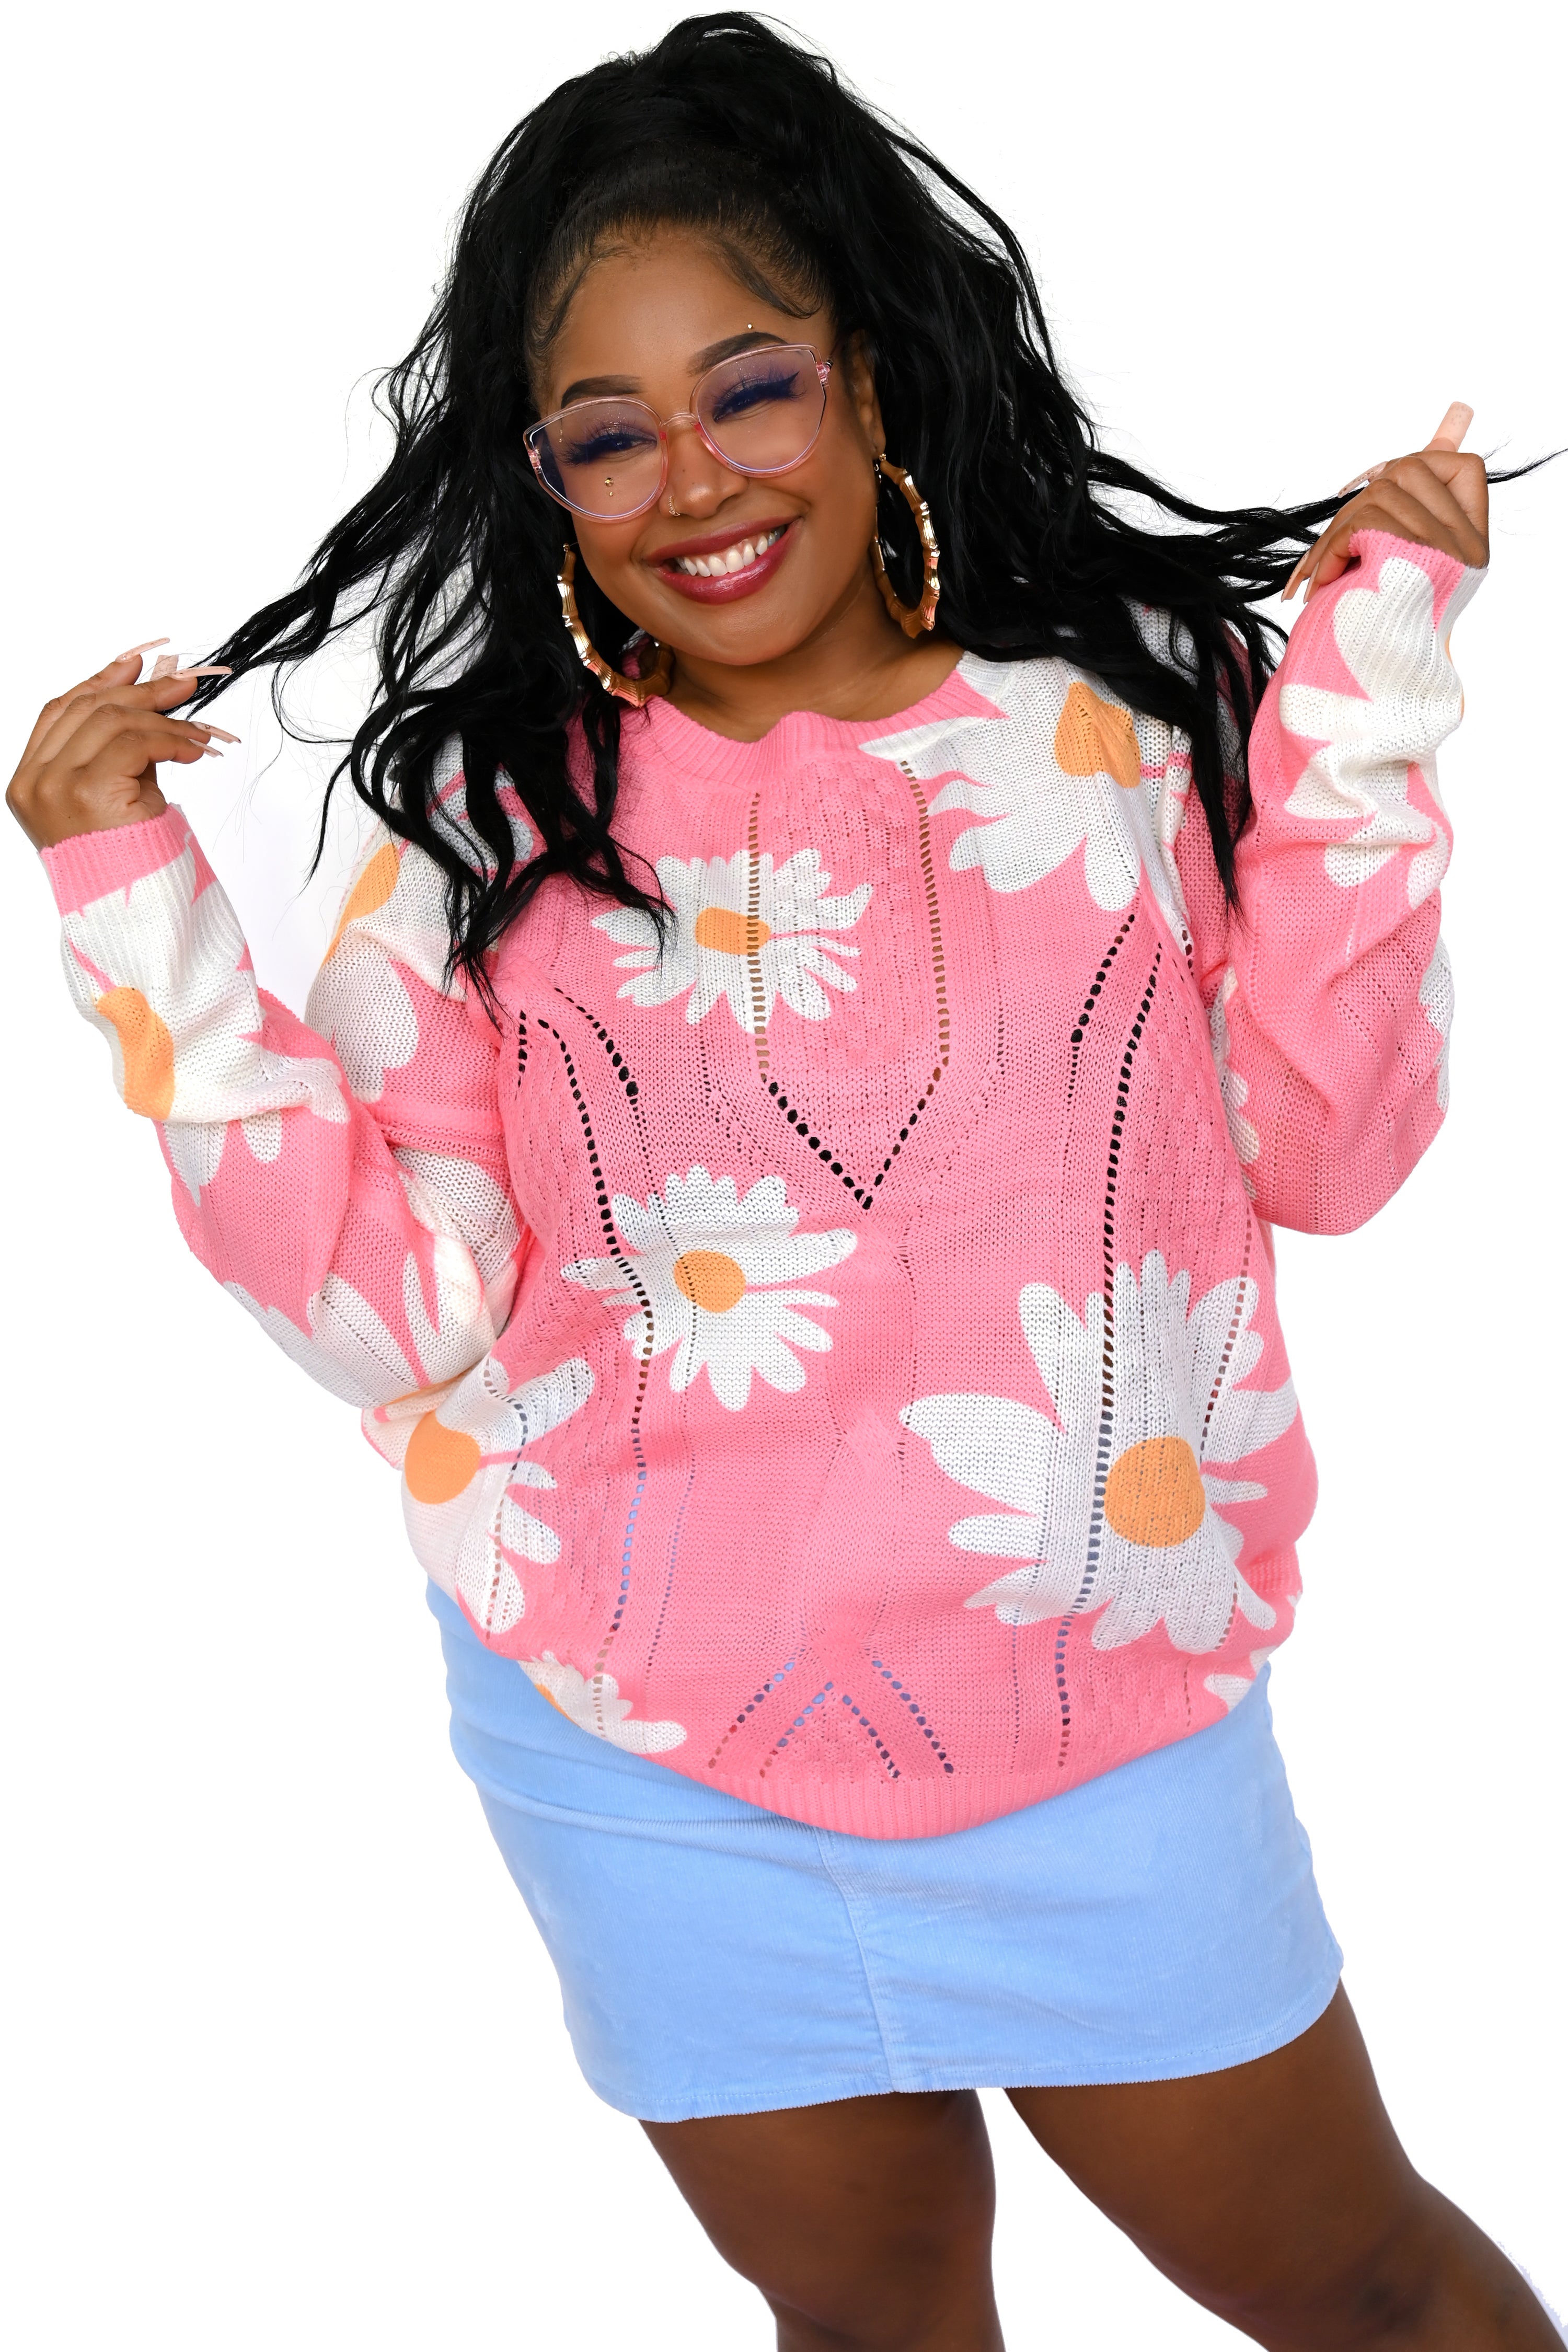 Model wearing pink oversized sweater with daisy pattern